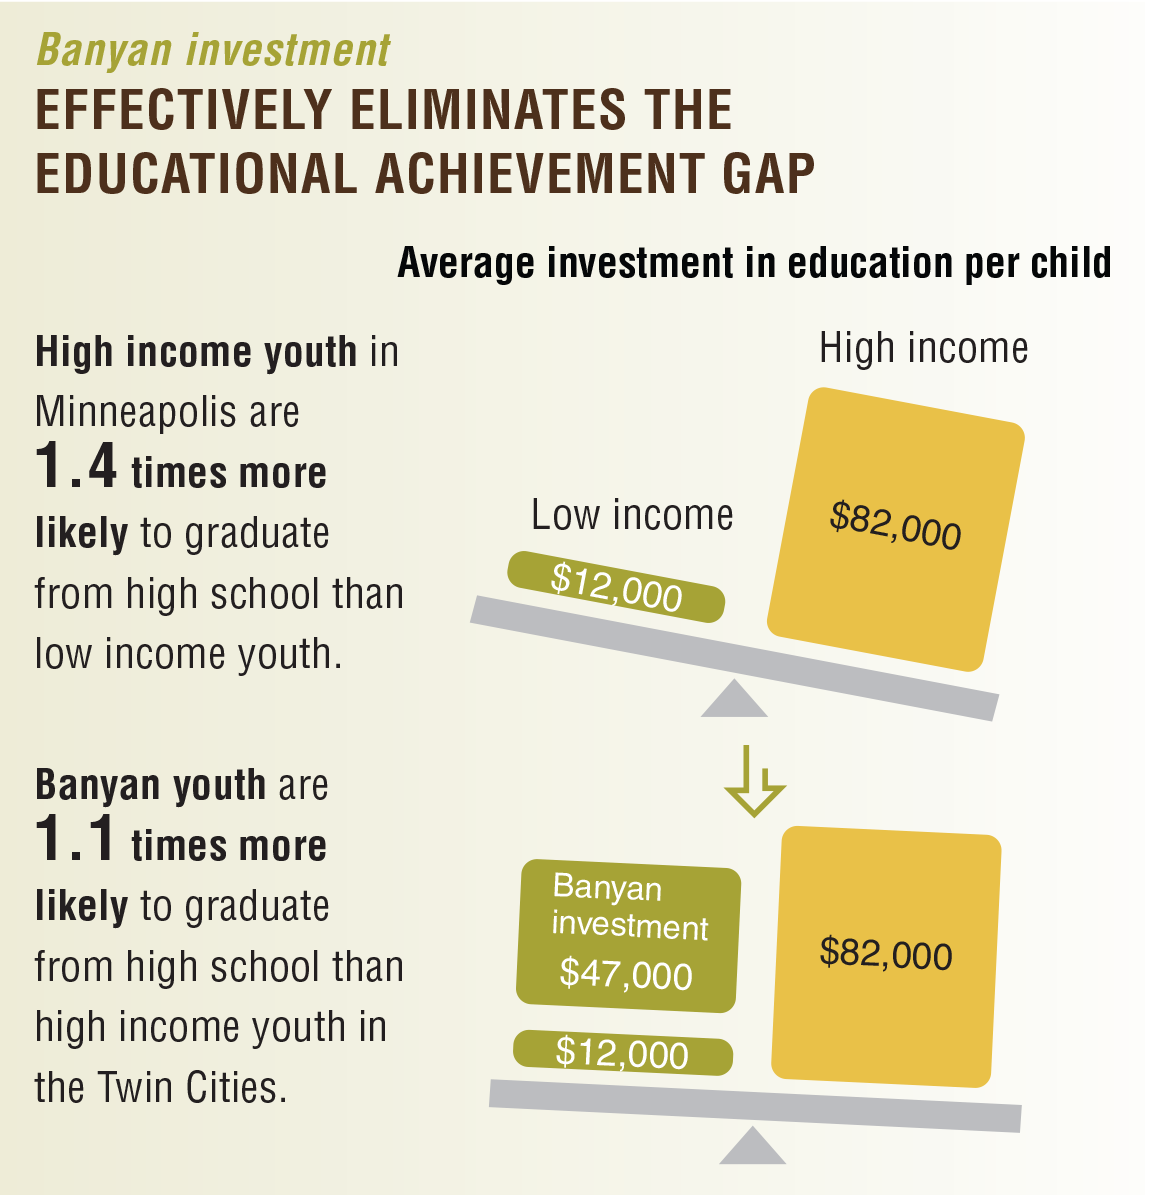 Banyan investment chart showing average investment in education per child